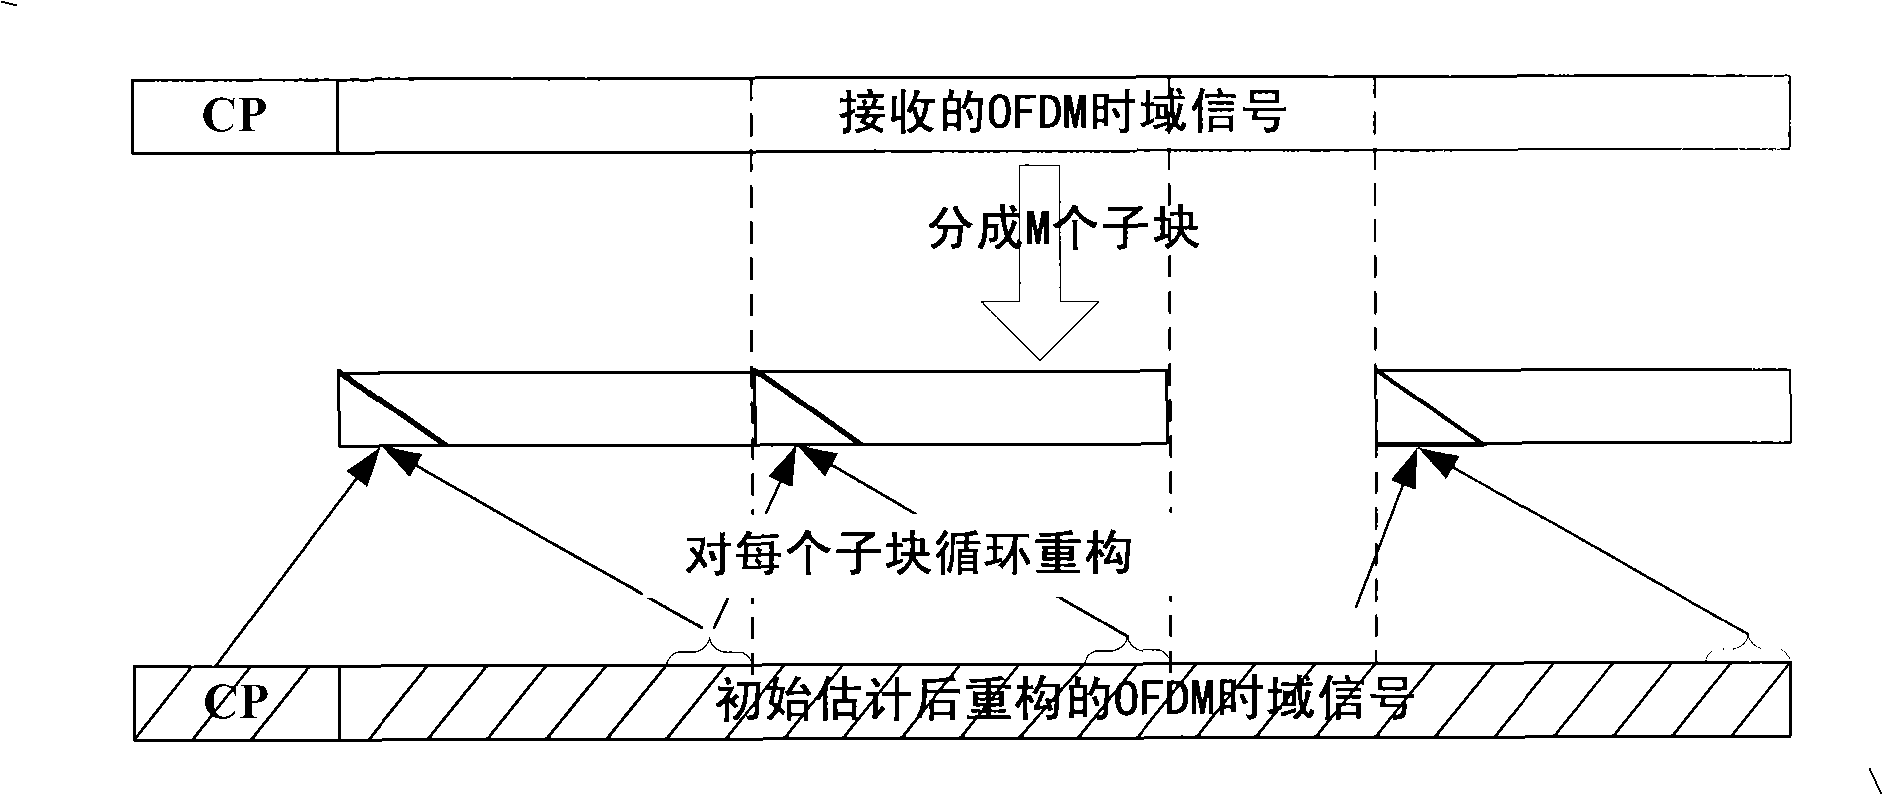 Blocking equalizing method for OFDM system under Quick-Change channel condition